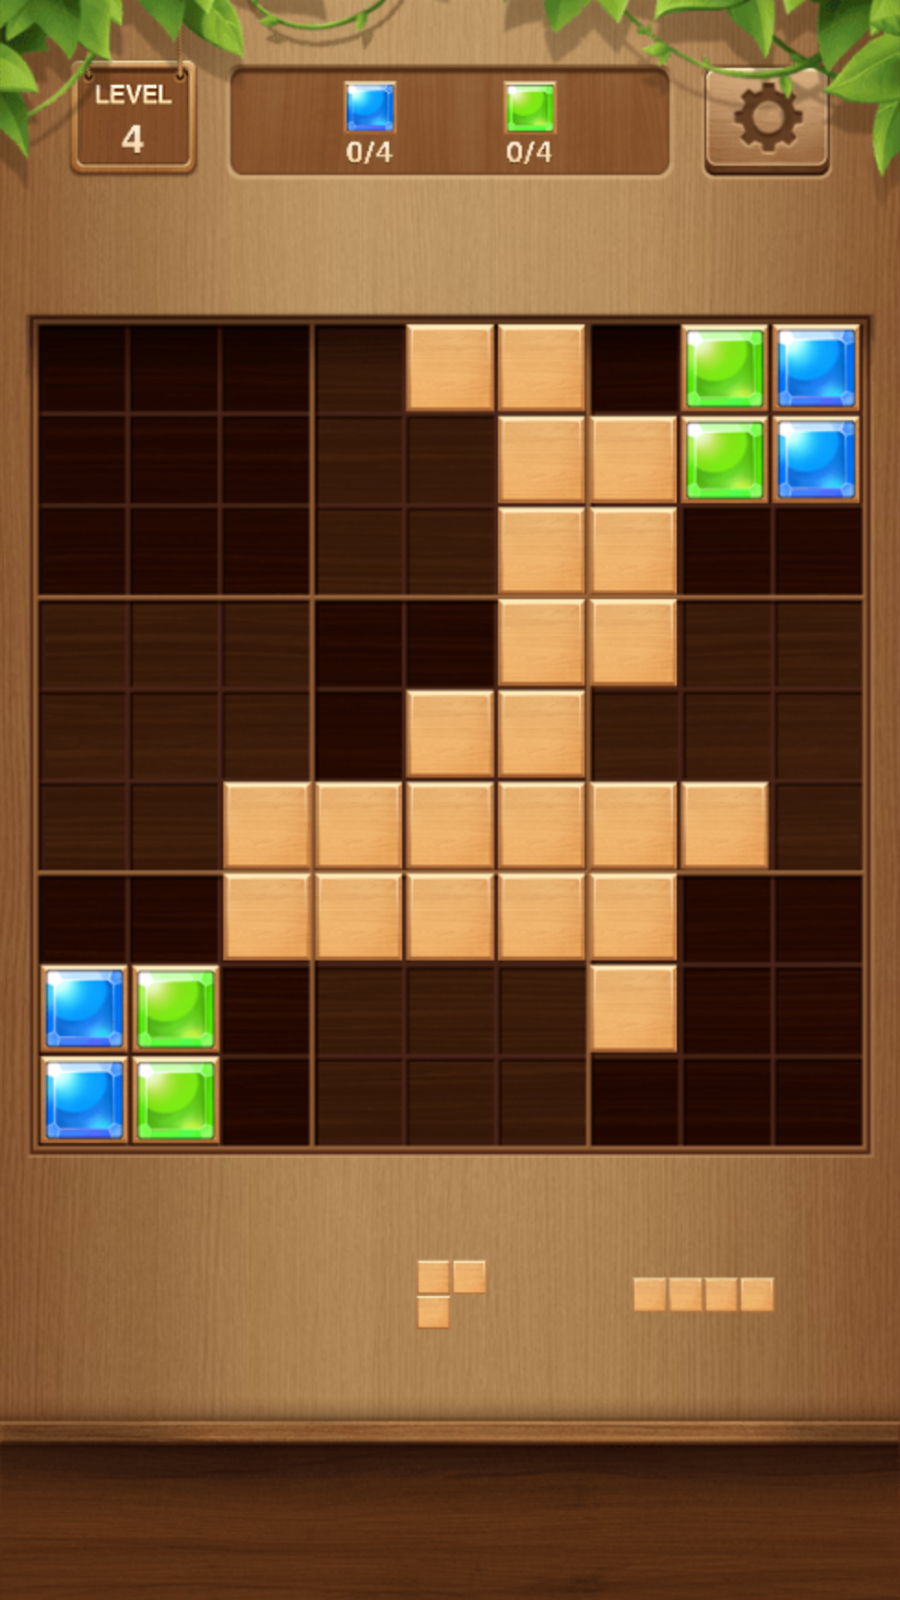 Block Puzzle — play online for free on Yandex Games